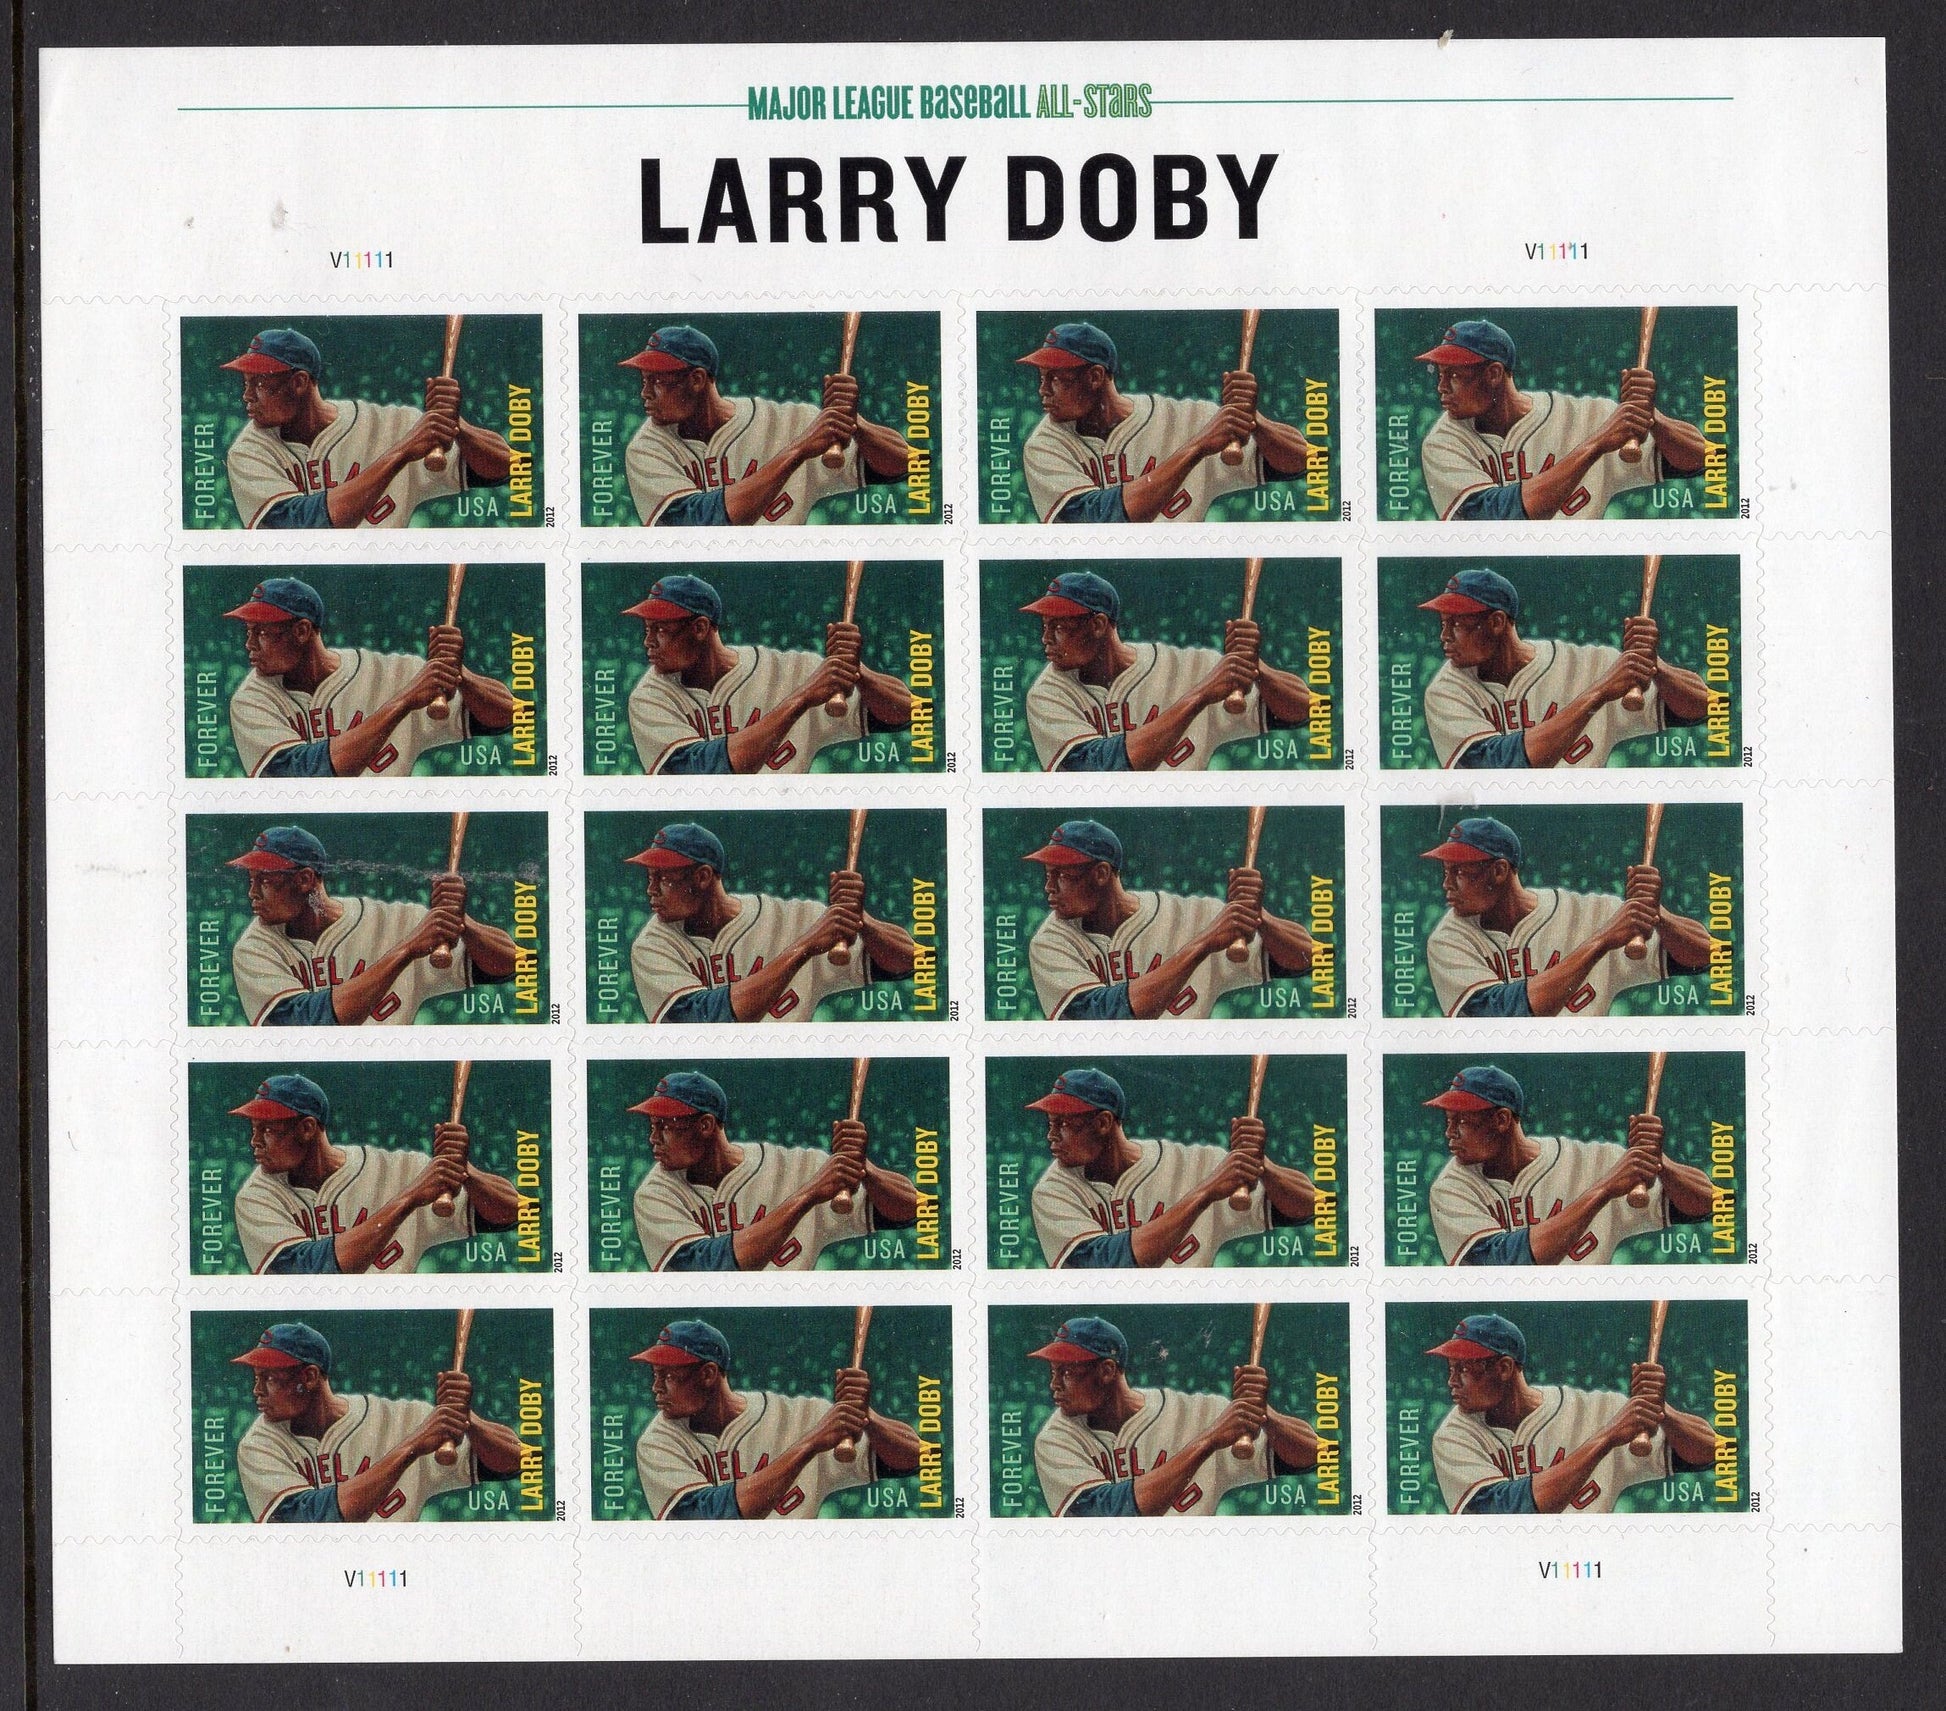 LARRY DOBY Sheet of 20 Cleveland Indian Baseball All - sTAR Fresh Unused USA Postage Stamps - Issued in 2012 - s4695 -